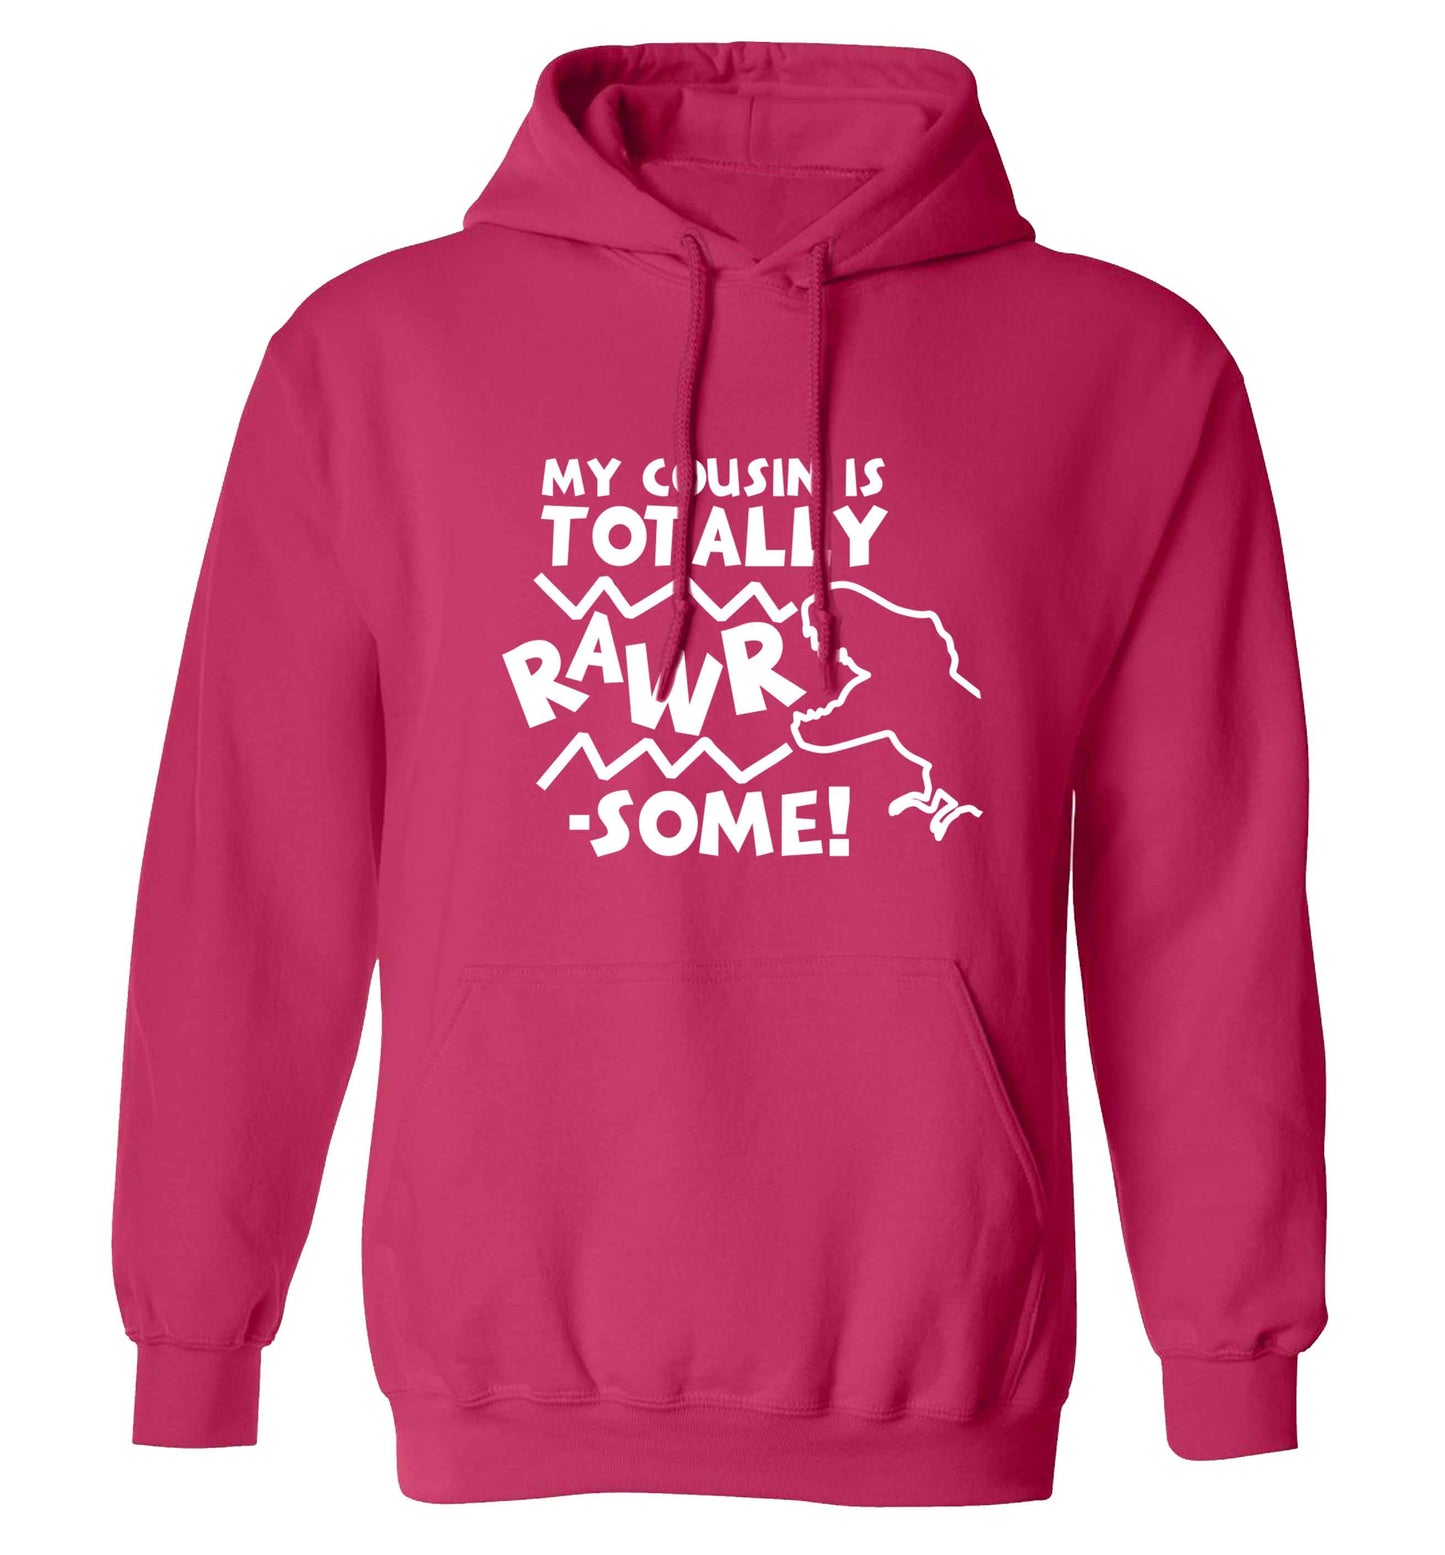 My cousin is totally rawrsome adults unisex pink hoodie 2XL